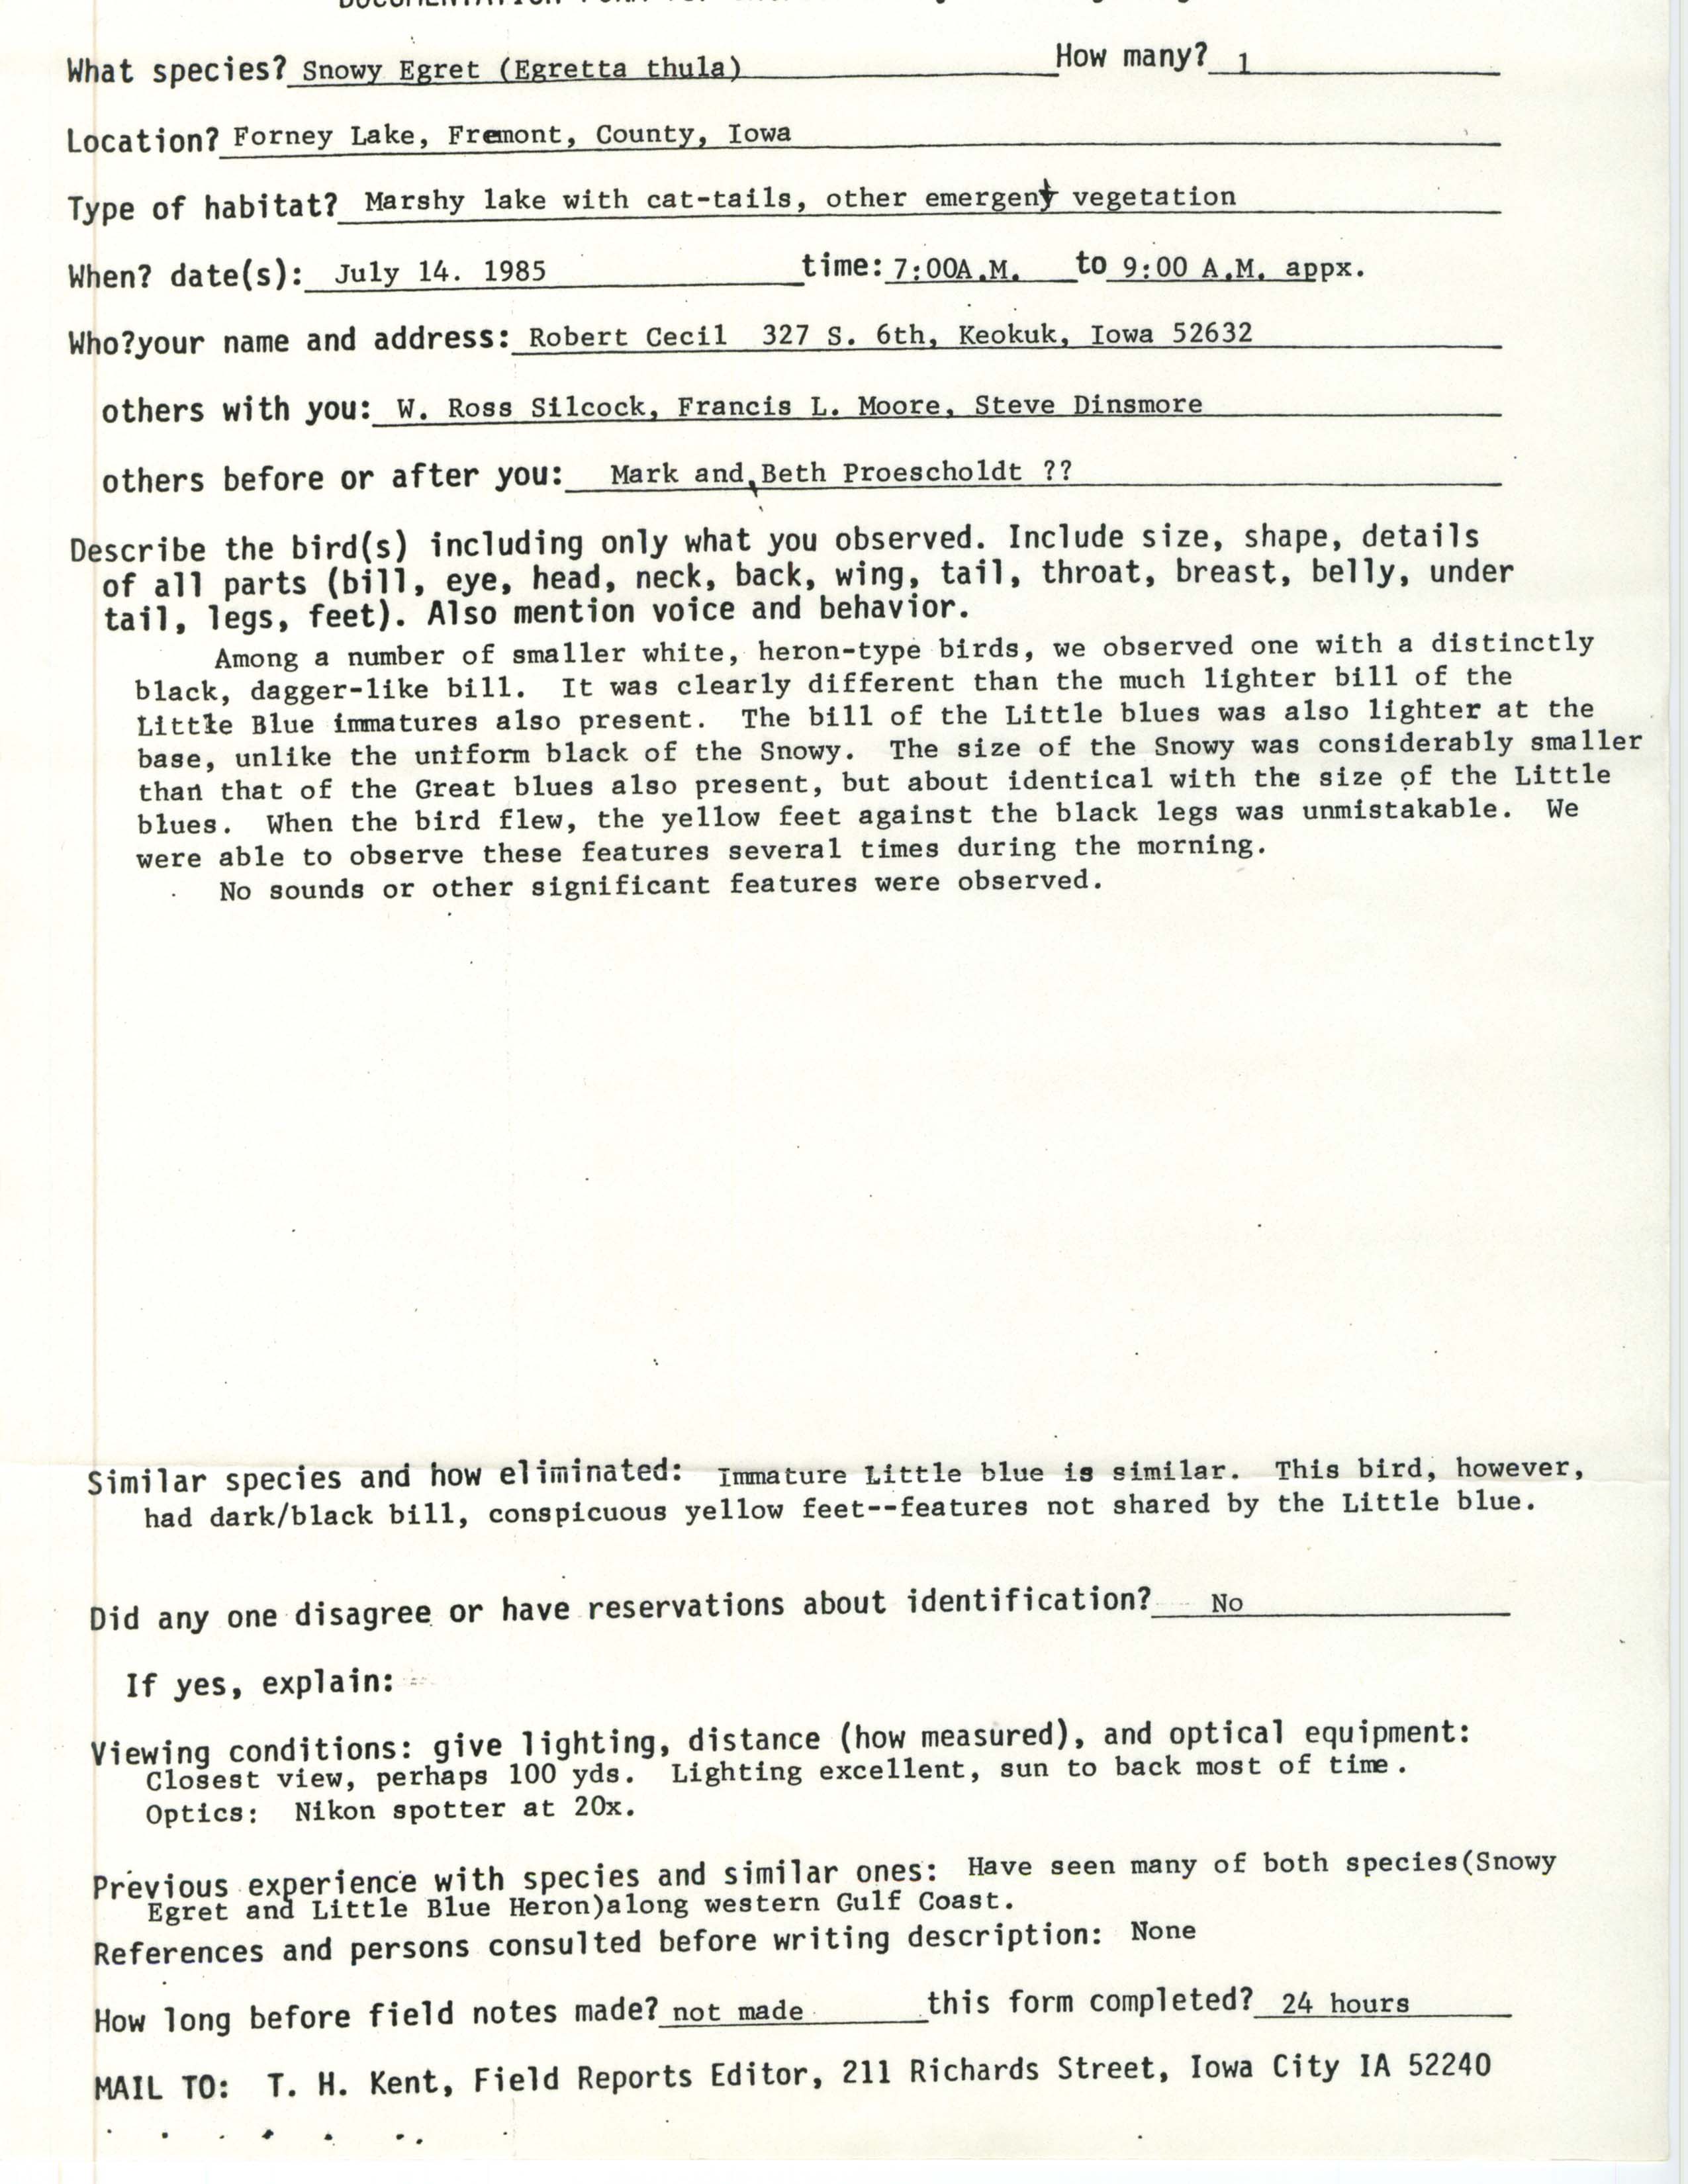 Rare bird documentation form for Snowy Egret at Forney Lake, 1985